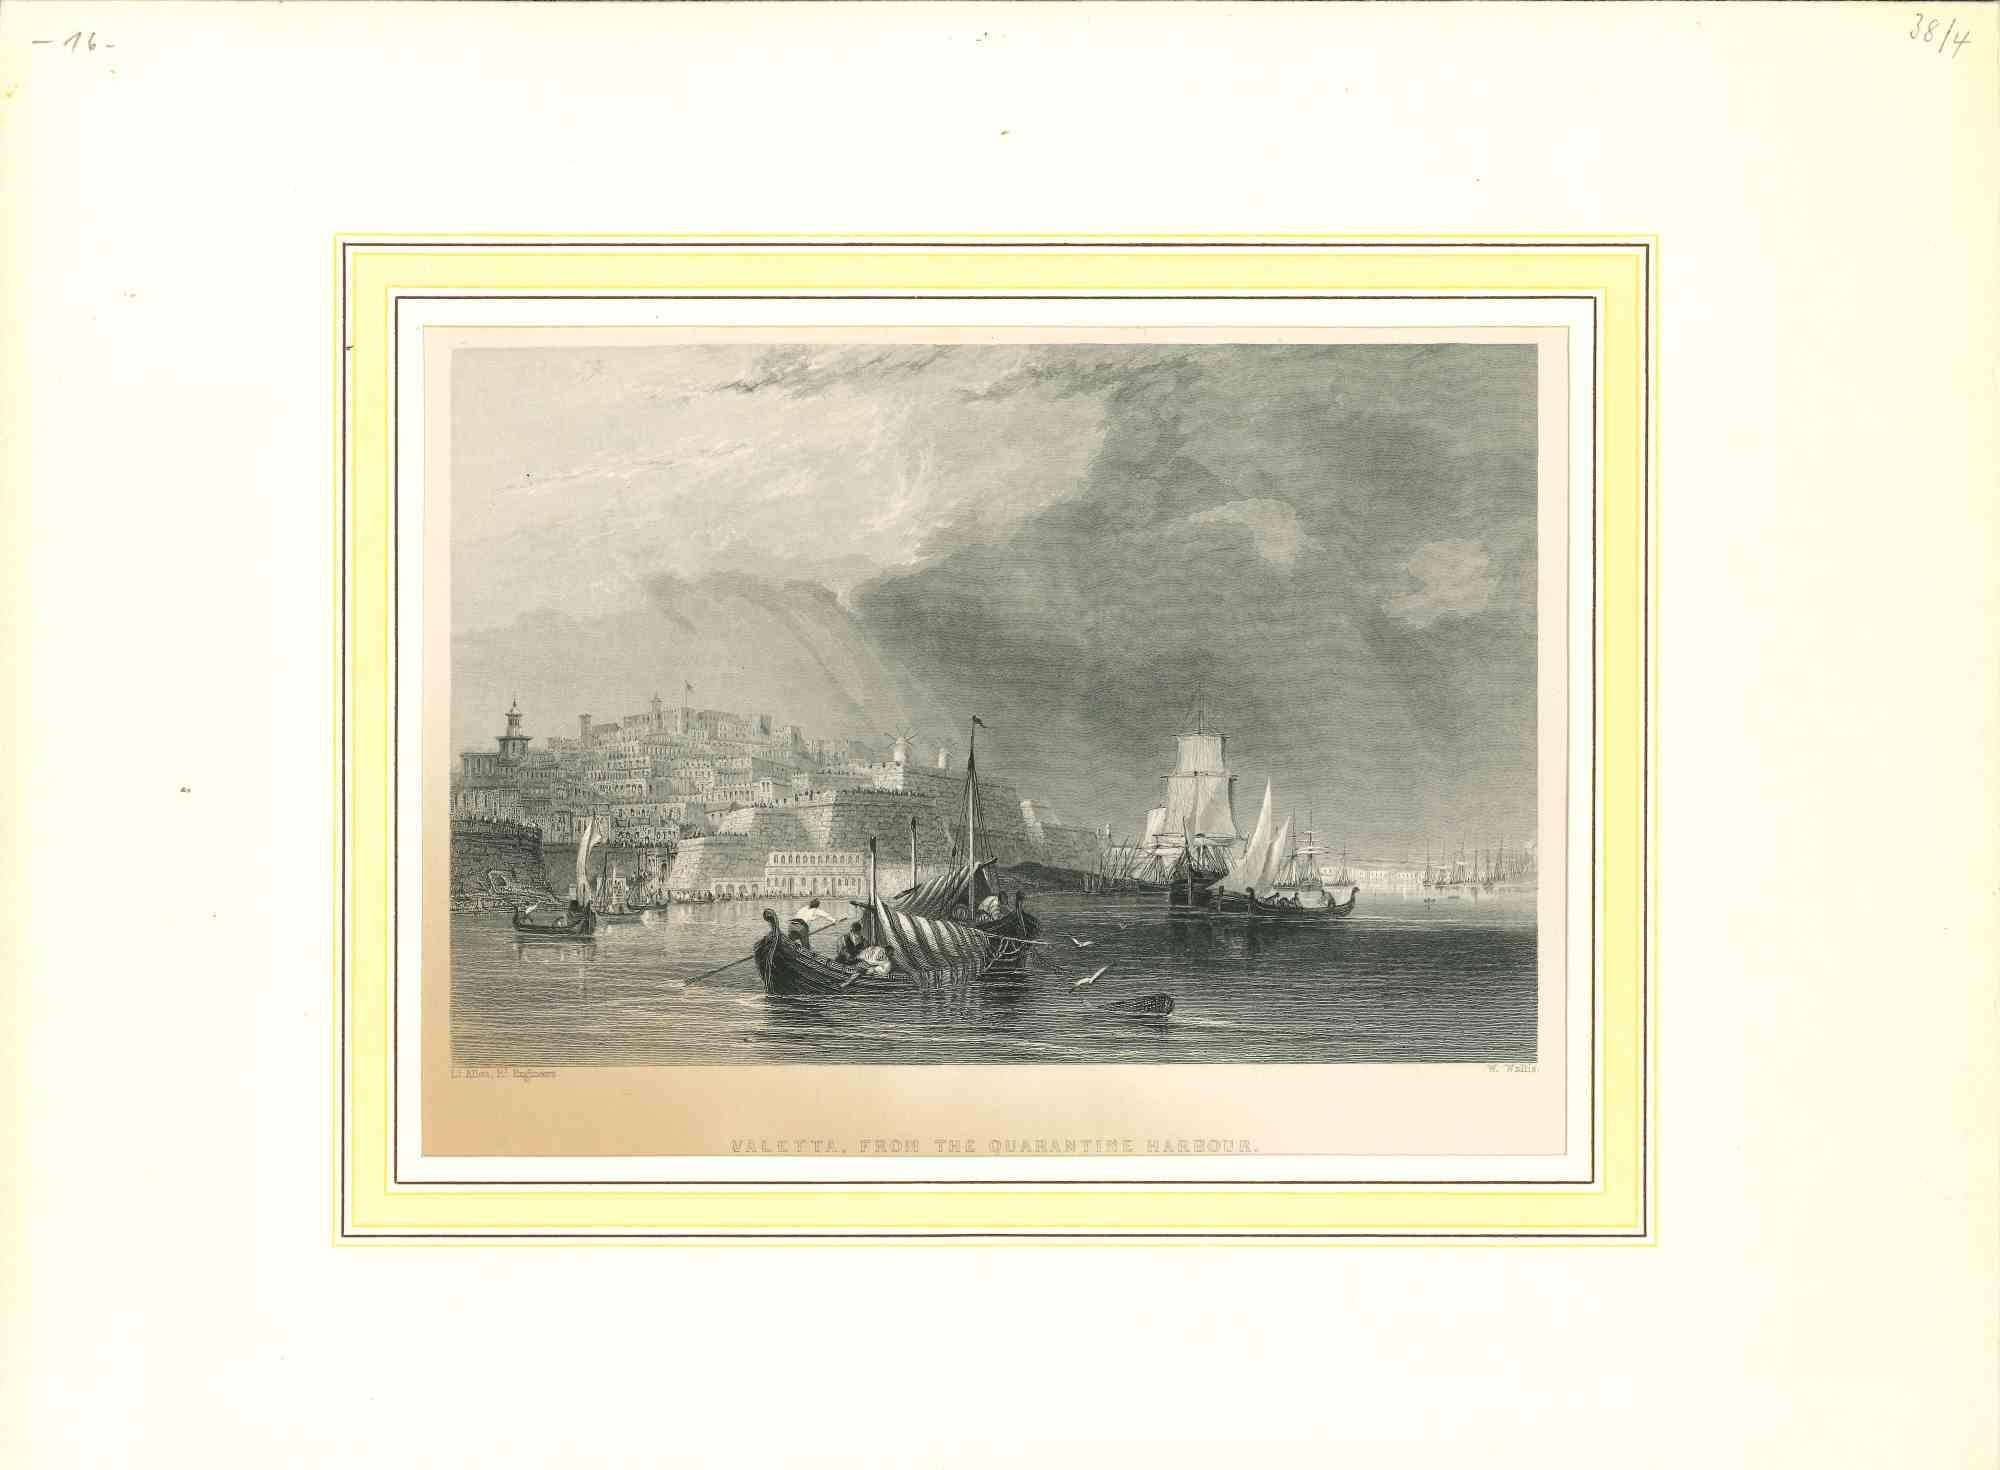 Unknown Figurative Print - Valletta From the Quarantine Harbour - Original Lithograph - Early-19th Century